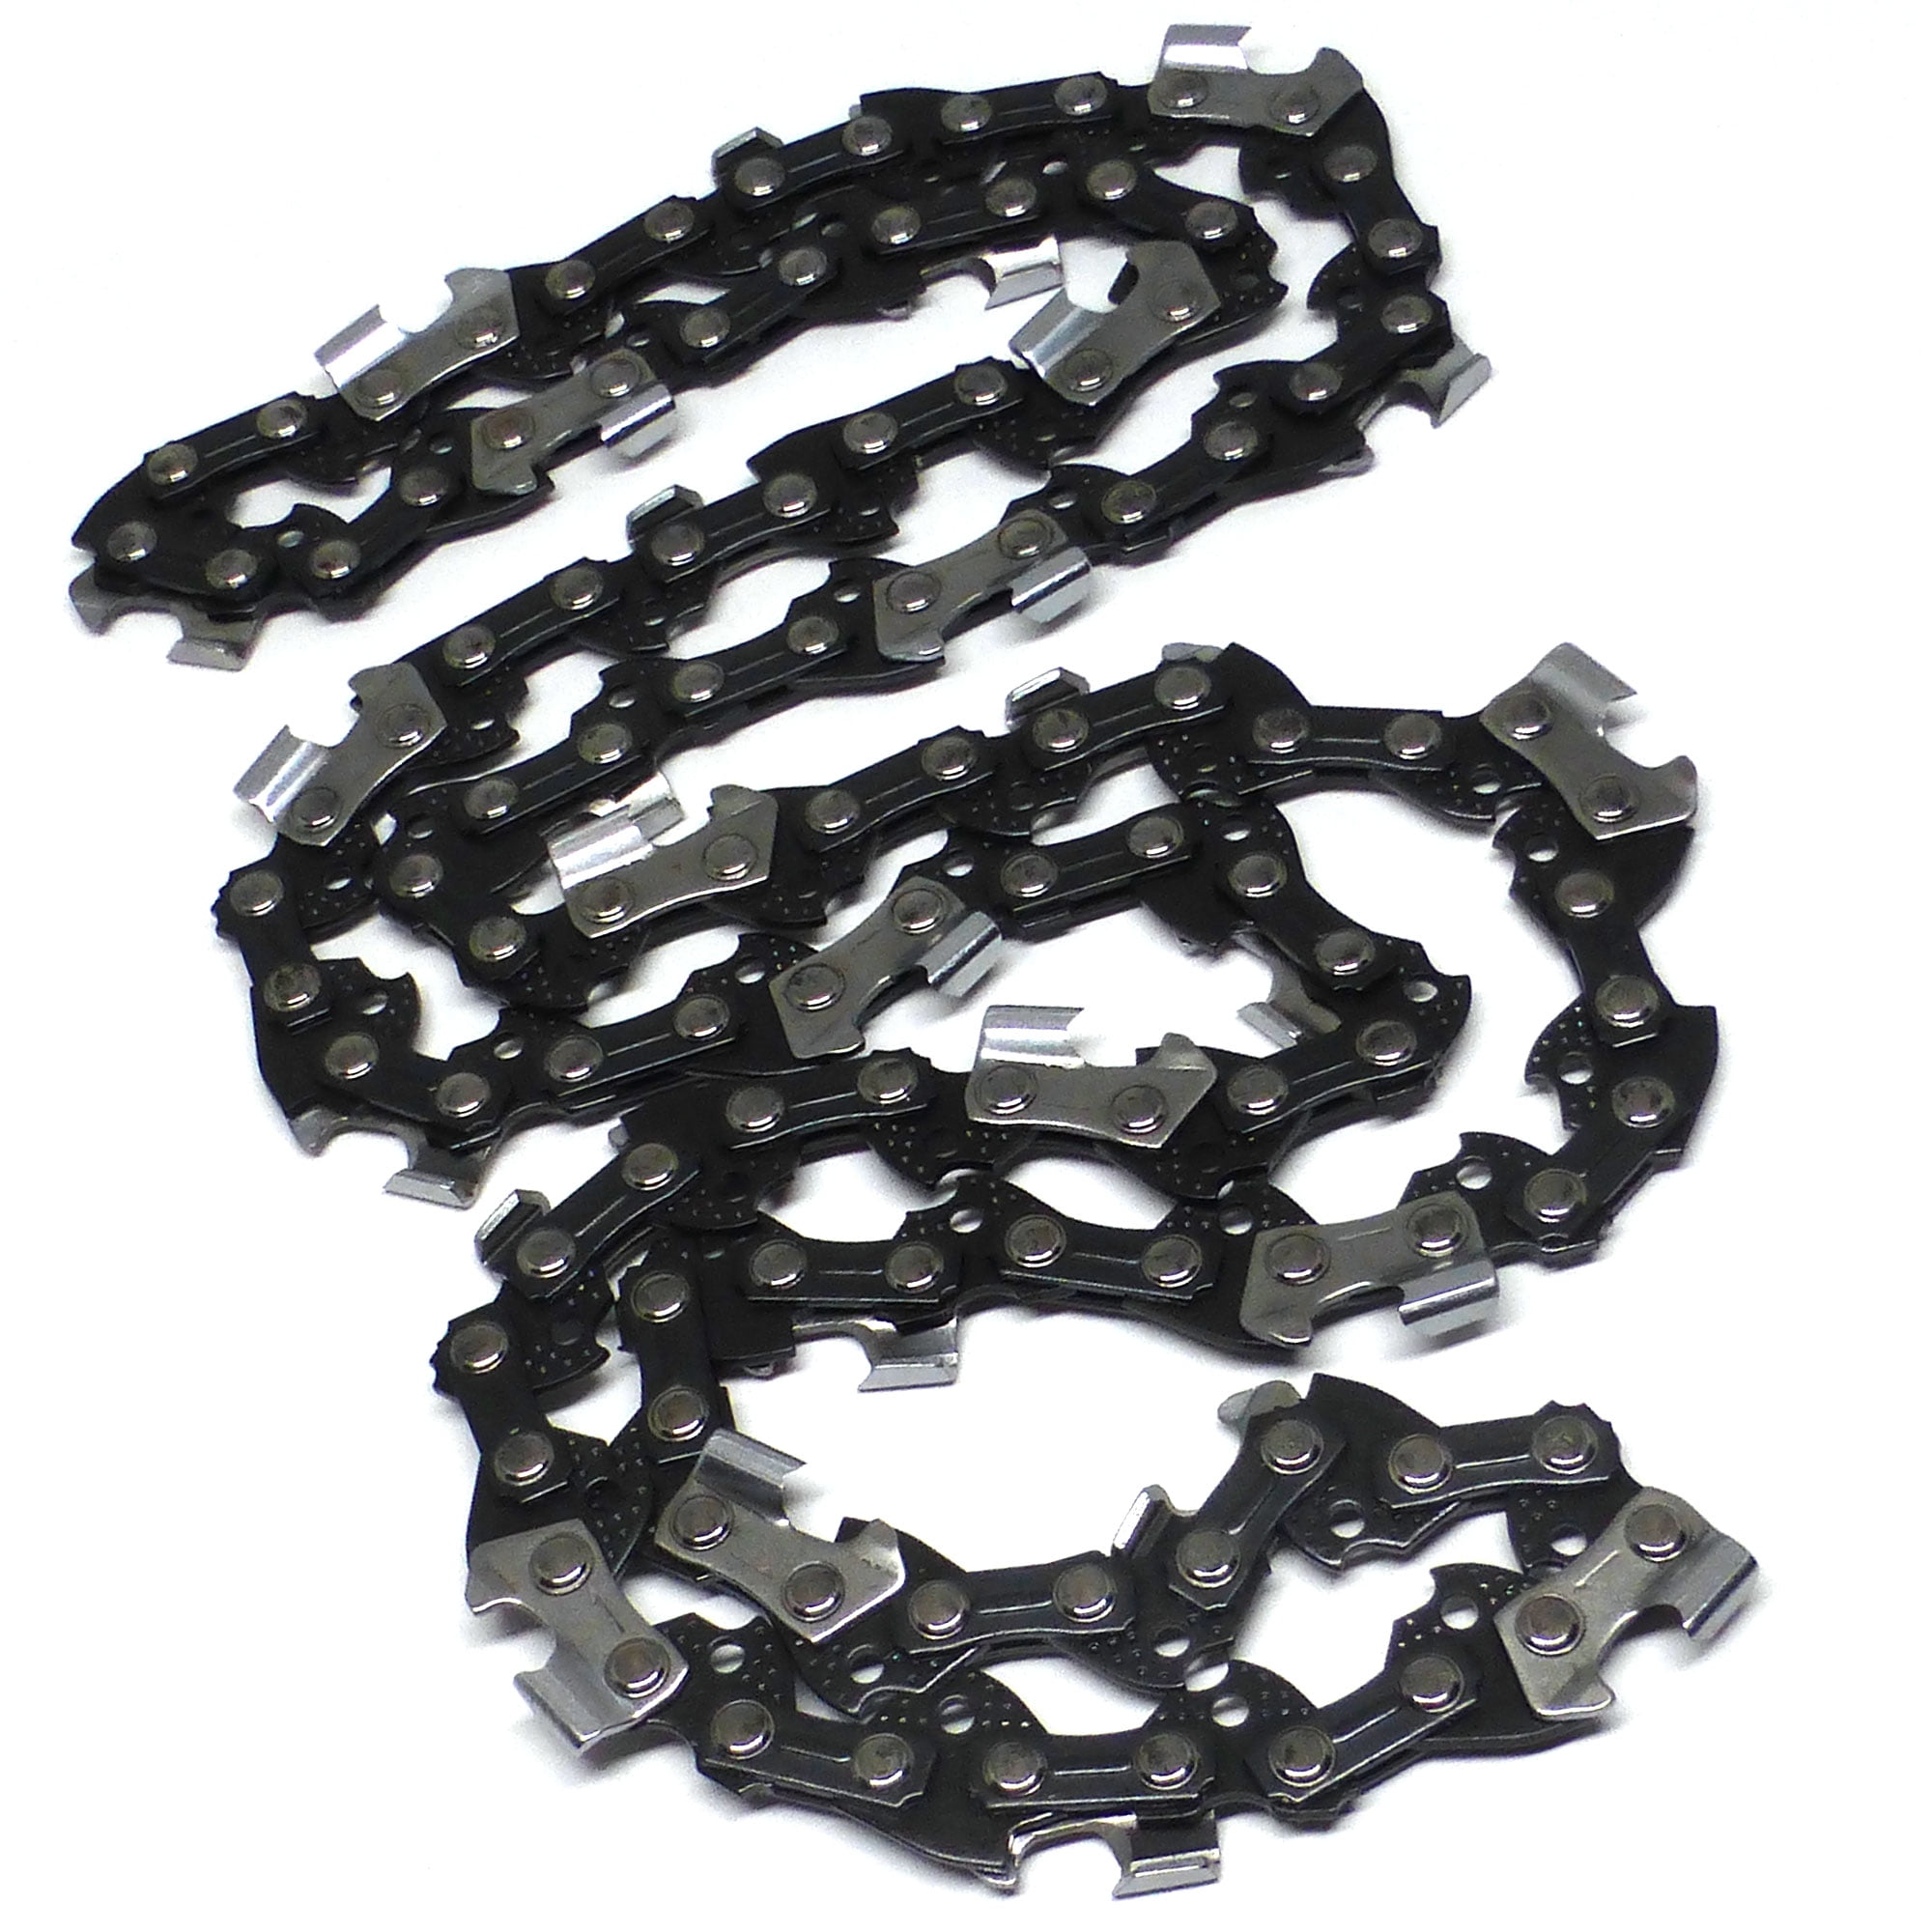 For Stihl 12” chain 3/8p .043 44 DL ht101 ht75 ms192 ms181 ms180 Chainsaw 